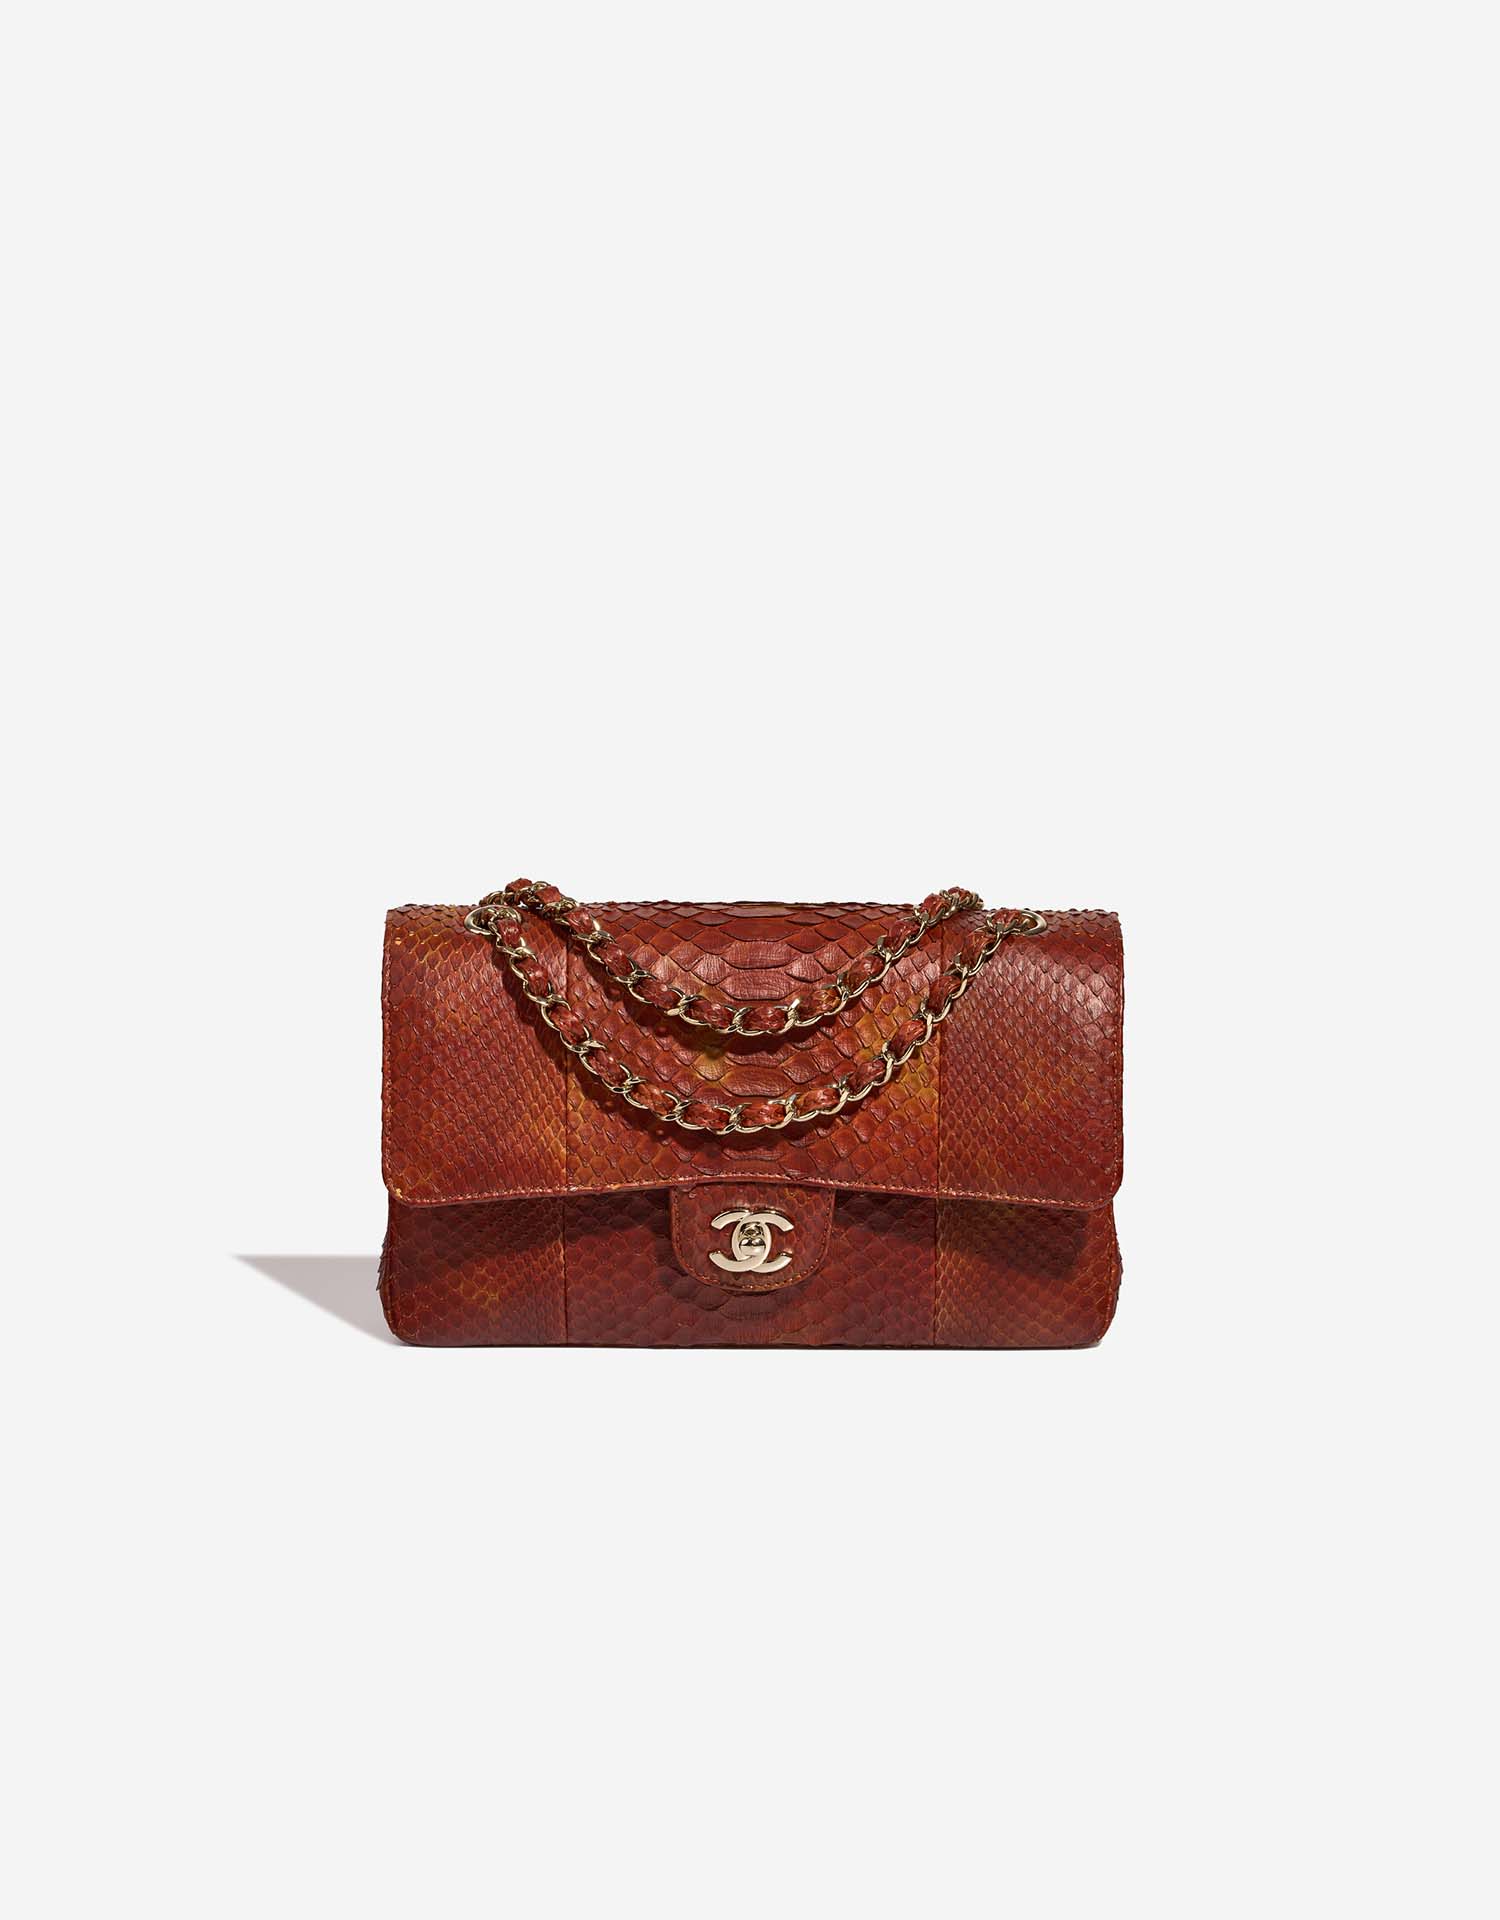 red chanel bag small